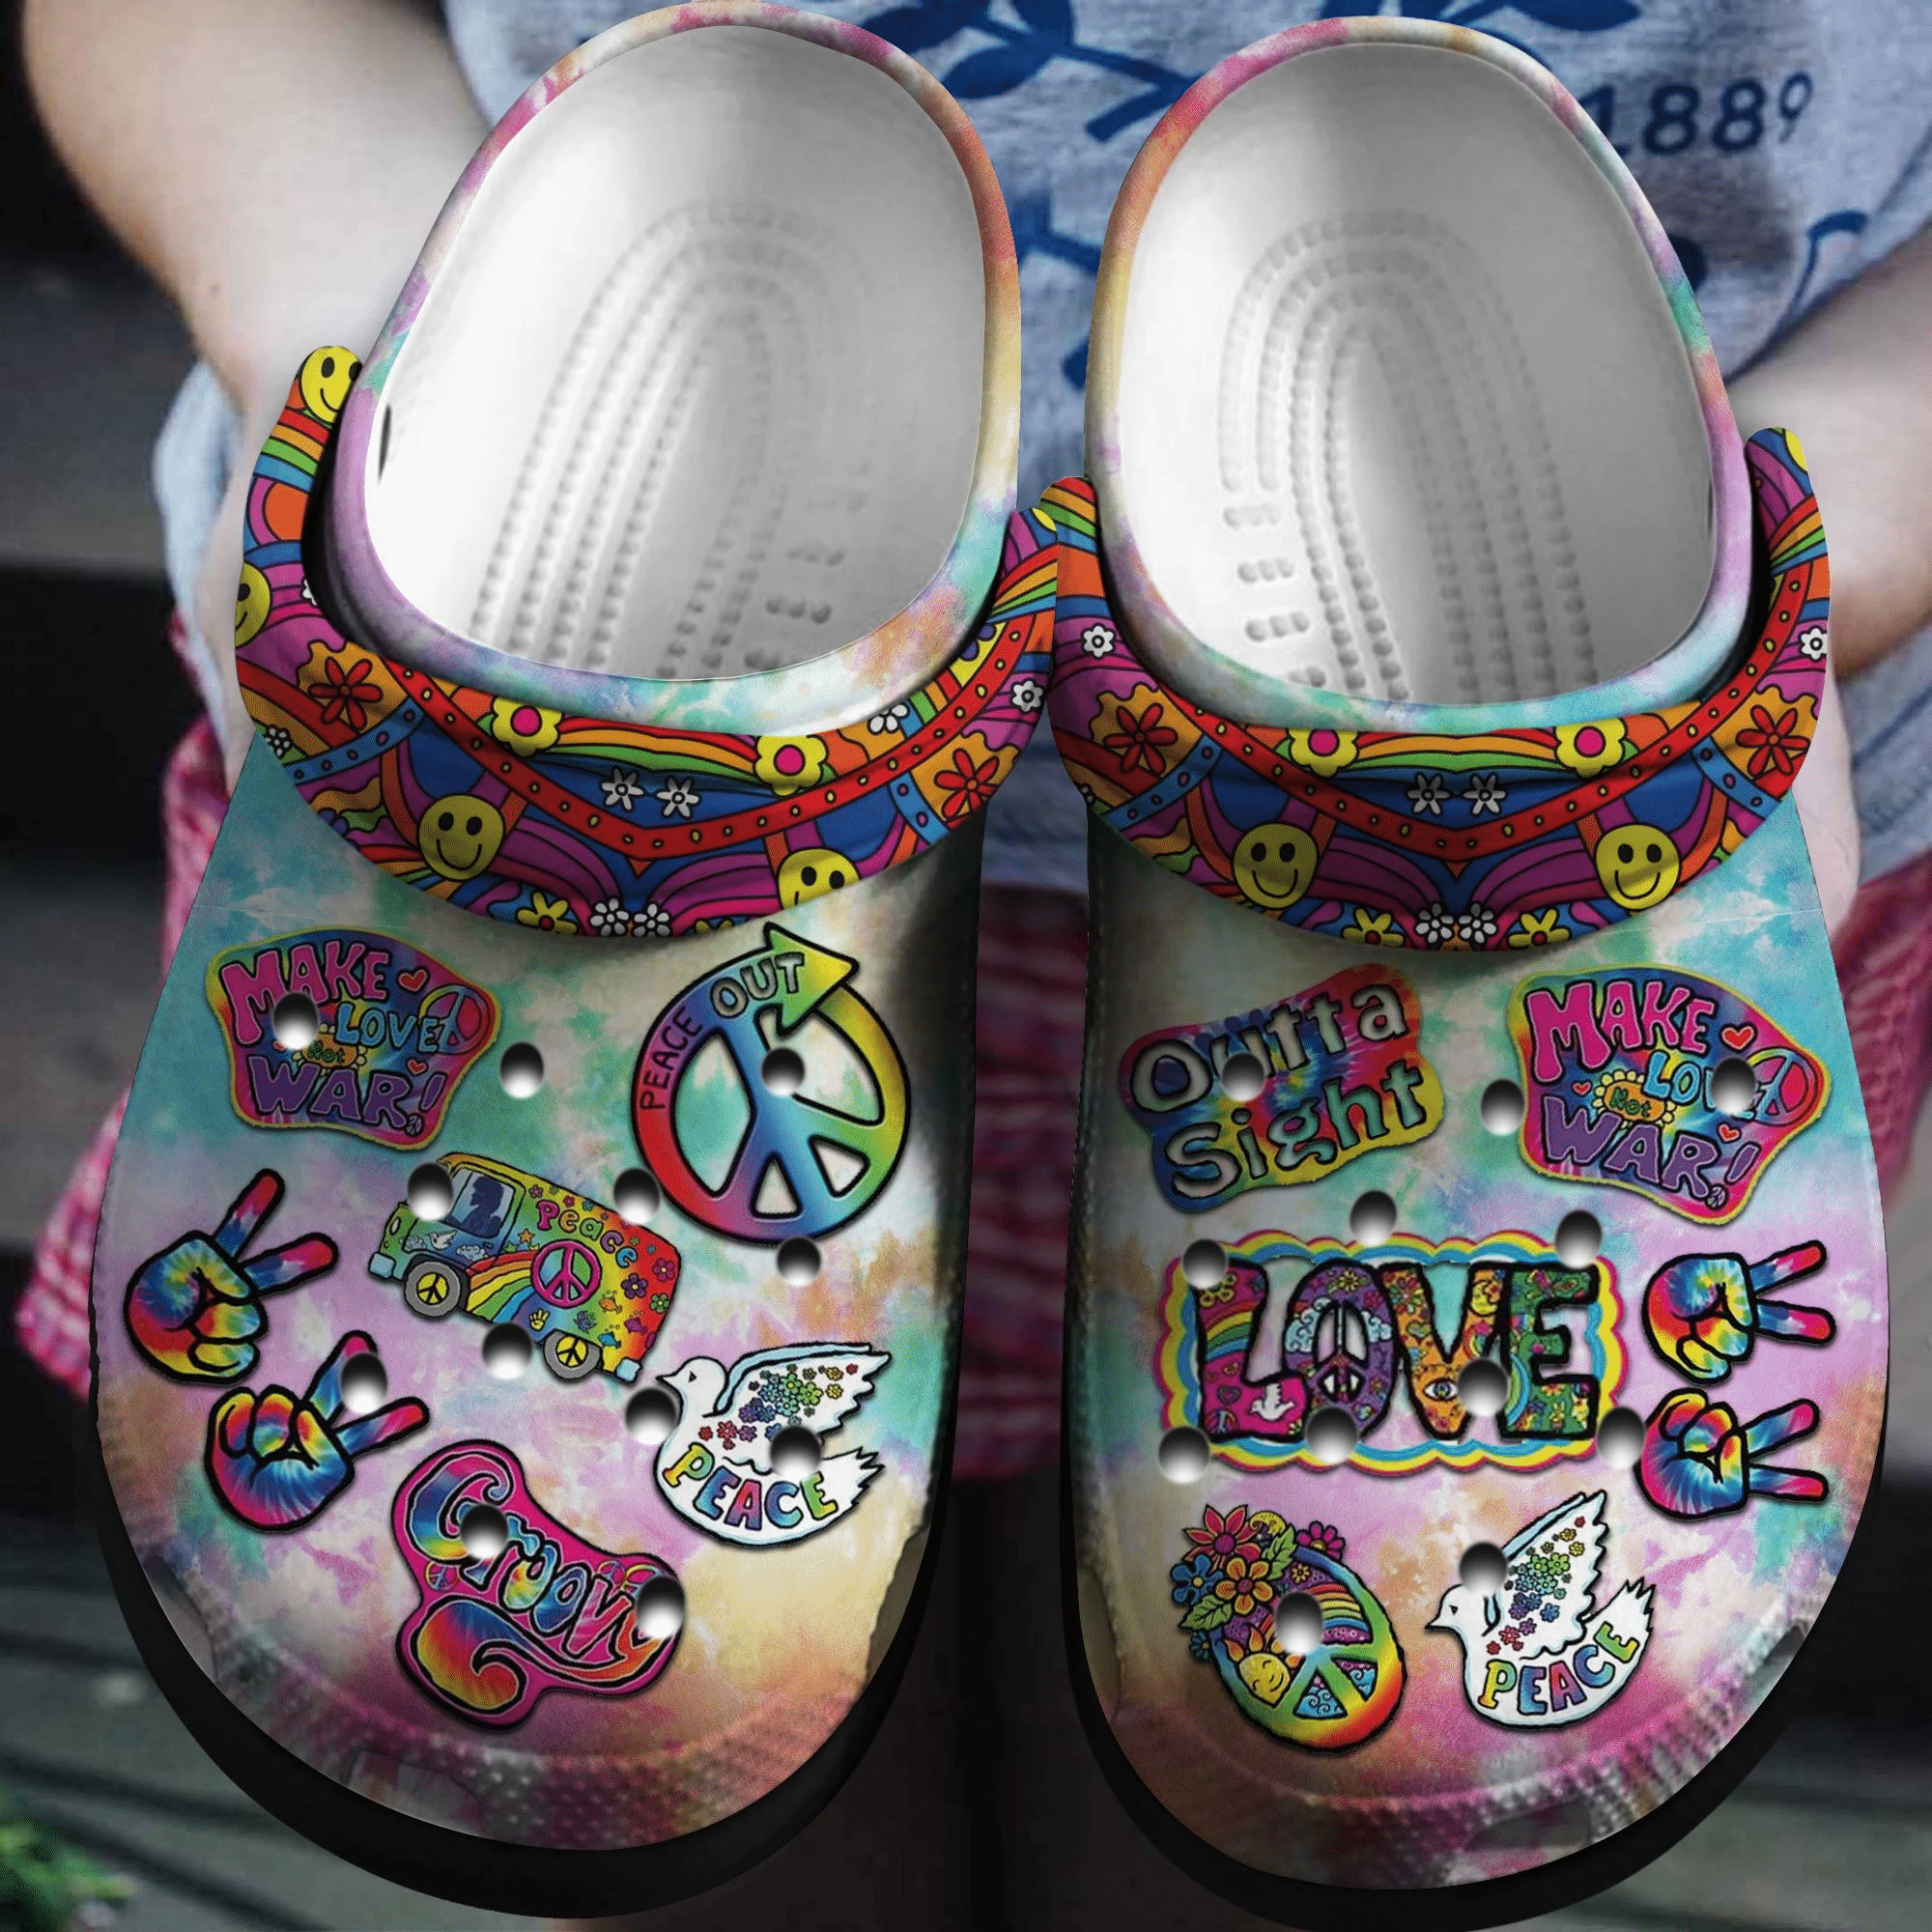 Peace Out Hippie Sticker Clog Shoes - Make Love War Clog Shoes bland Birthday Gift For Man Woman Boy Girl Product Photo 1 Product photo 1